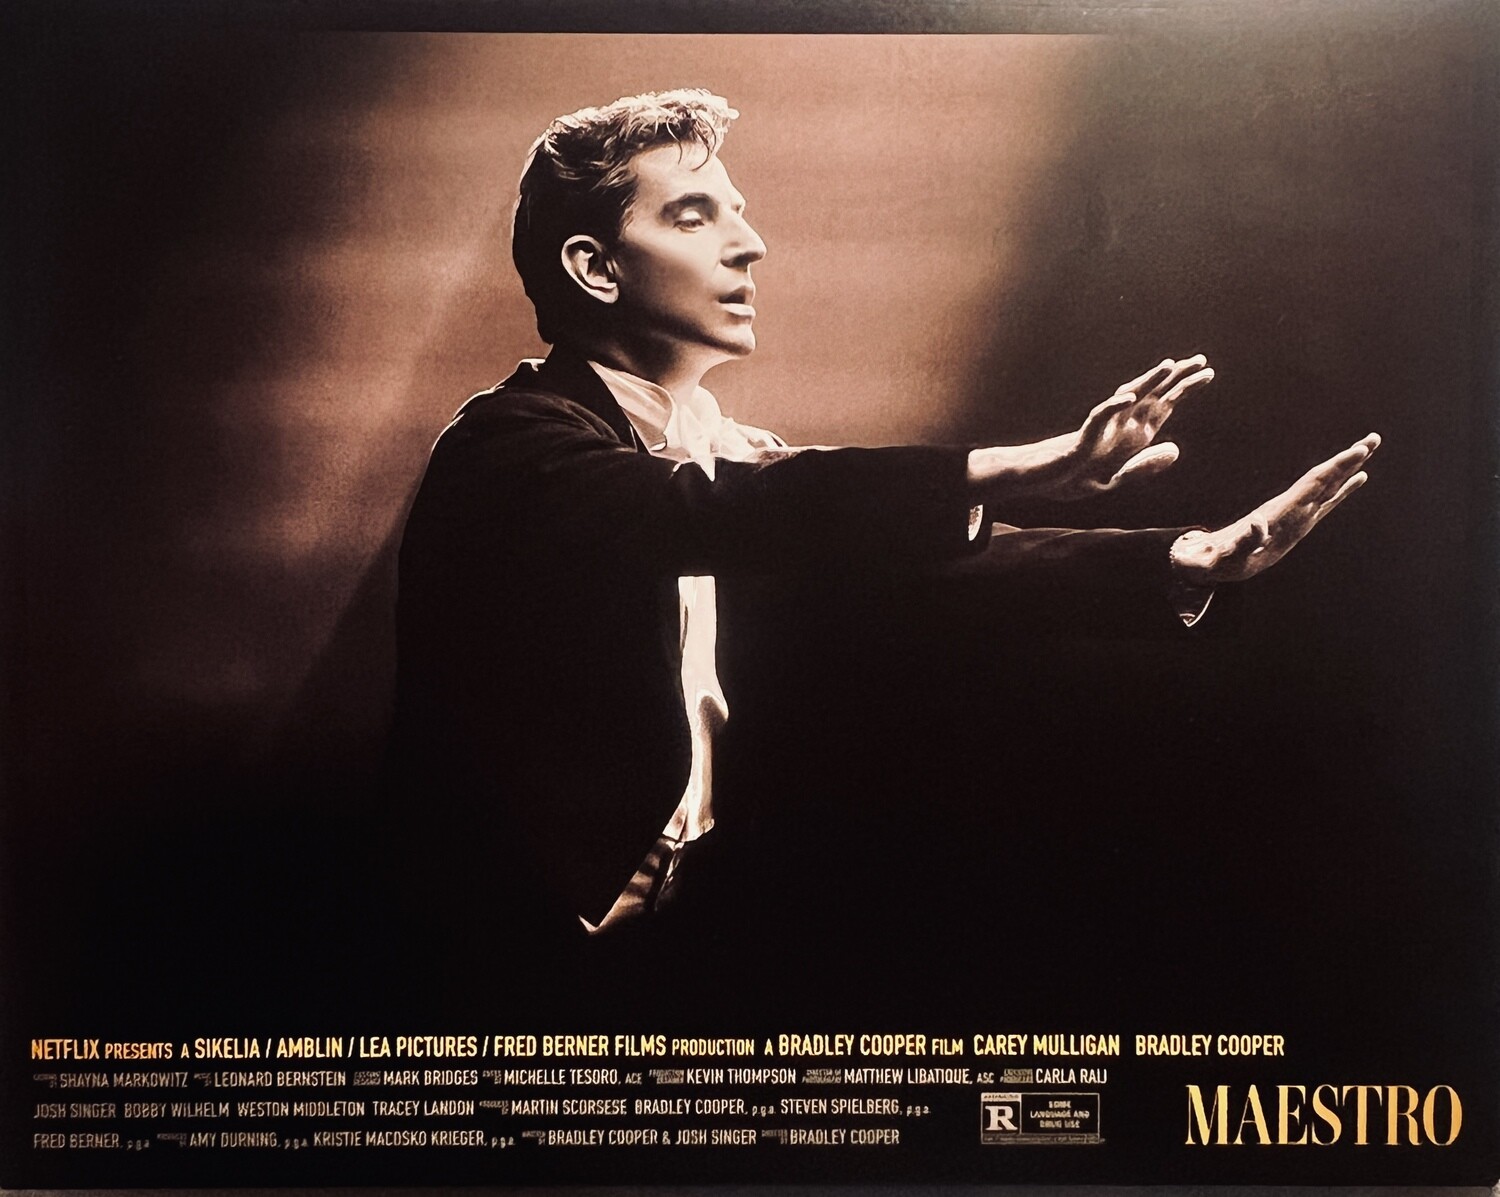 Maestro Promotional Lobby Cards (Set of 10)